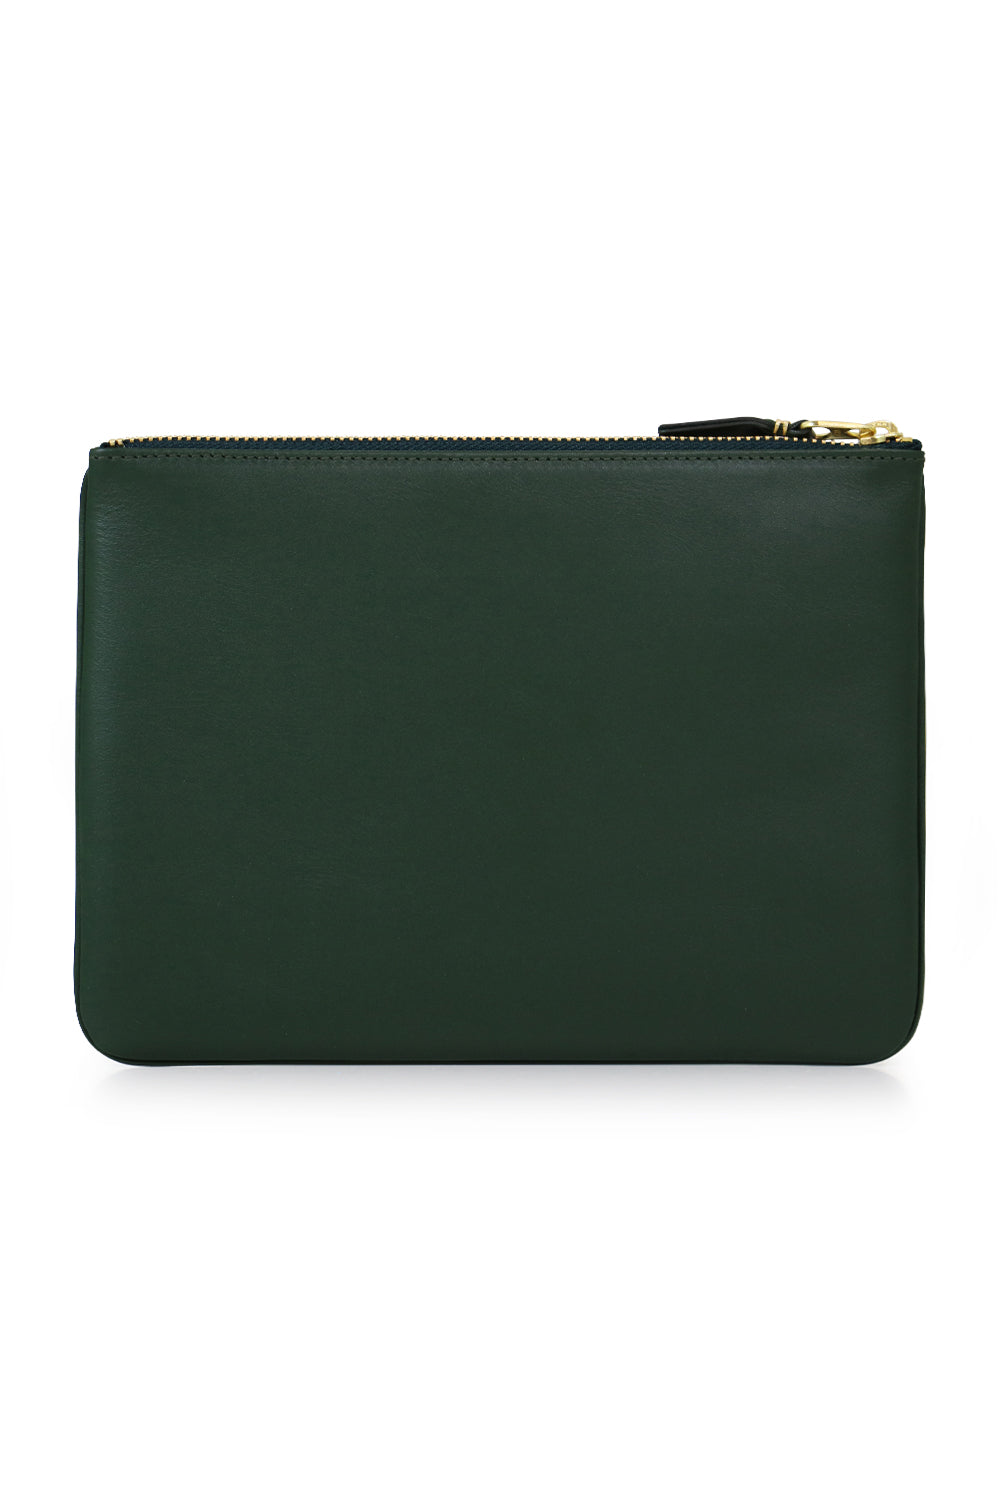 COMME DES GARCONS BAGS GREEN CLASSIC LEATHER POUCH | BOTTLE GREEN